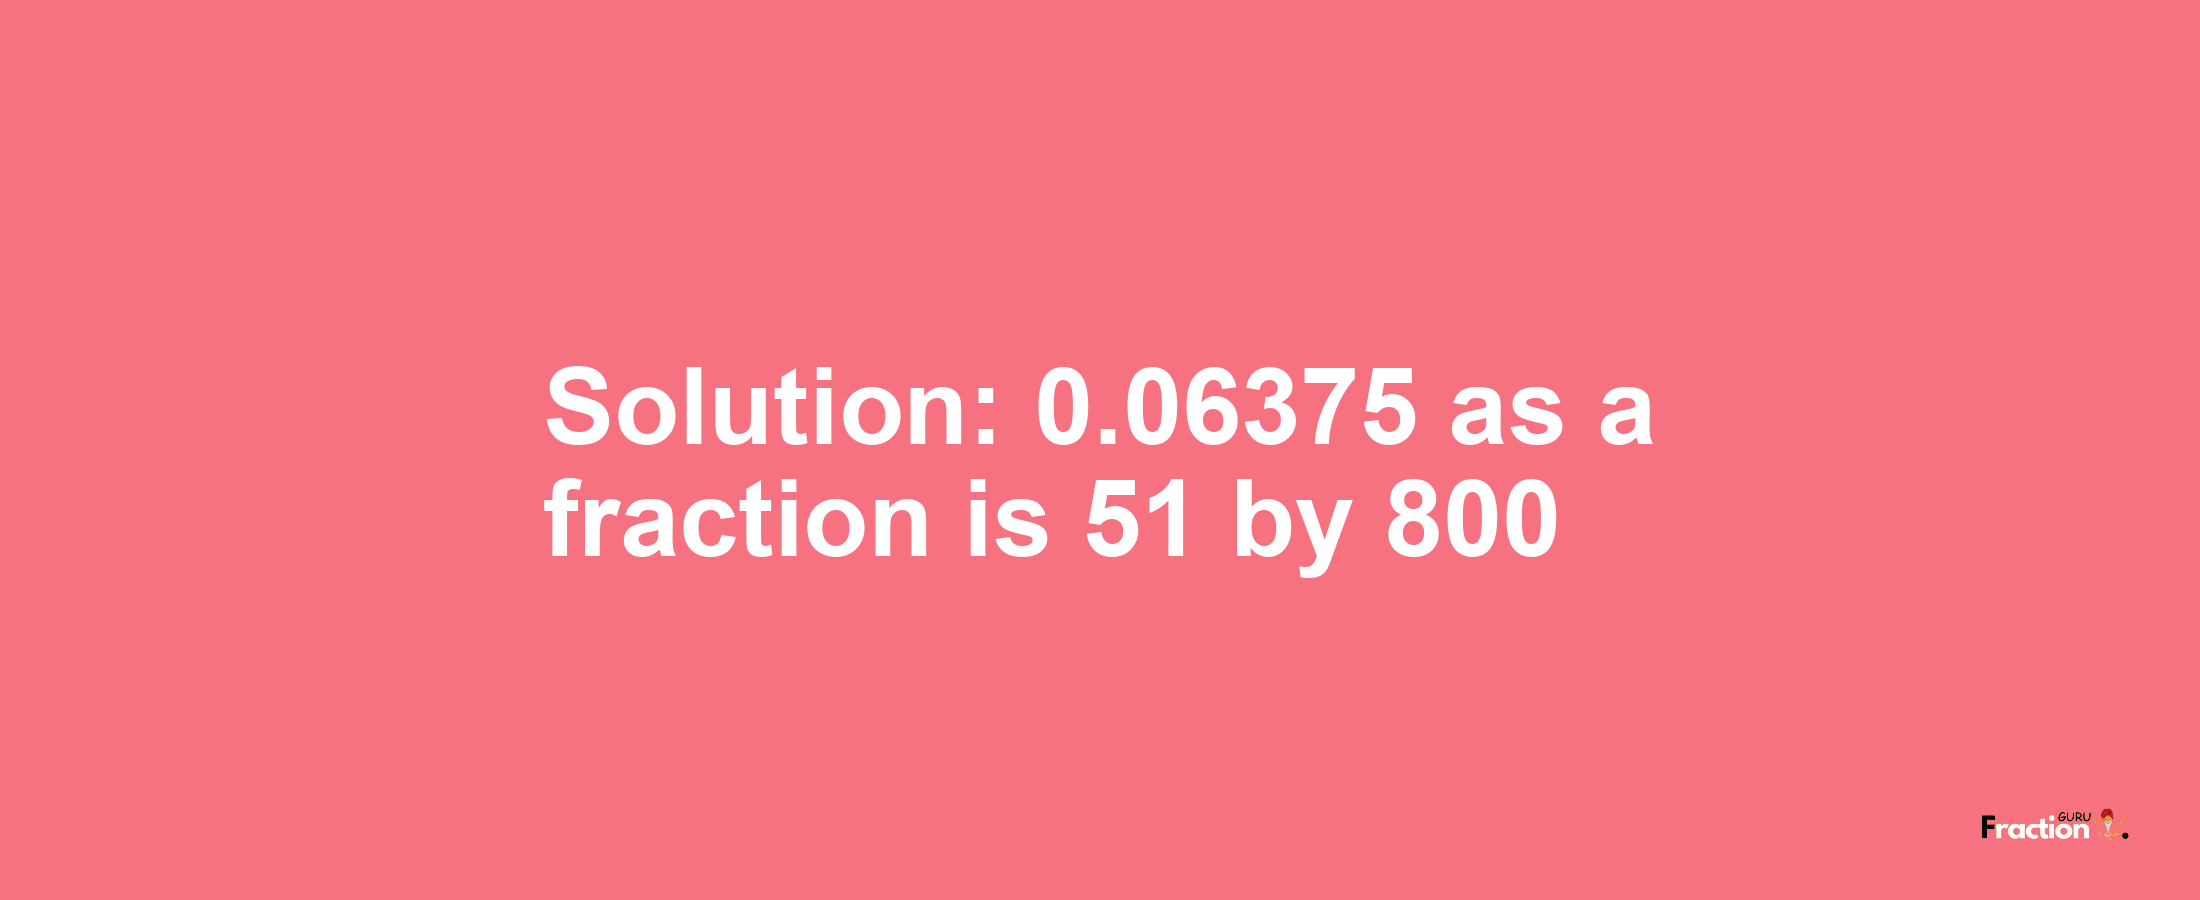 Solution:0.06375 as a fraction is 51/800